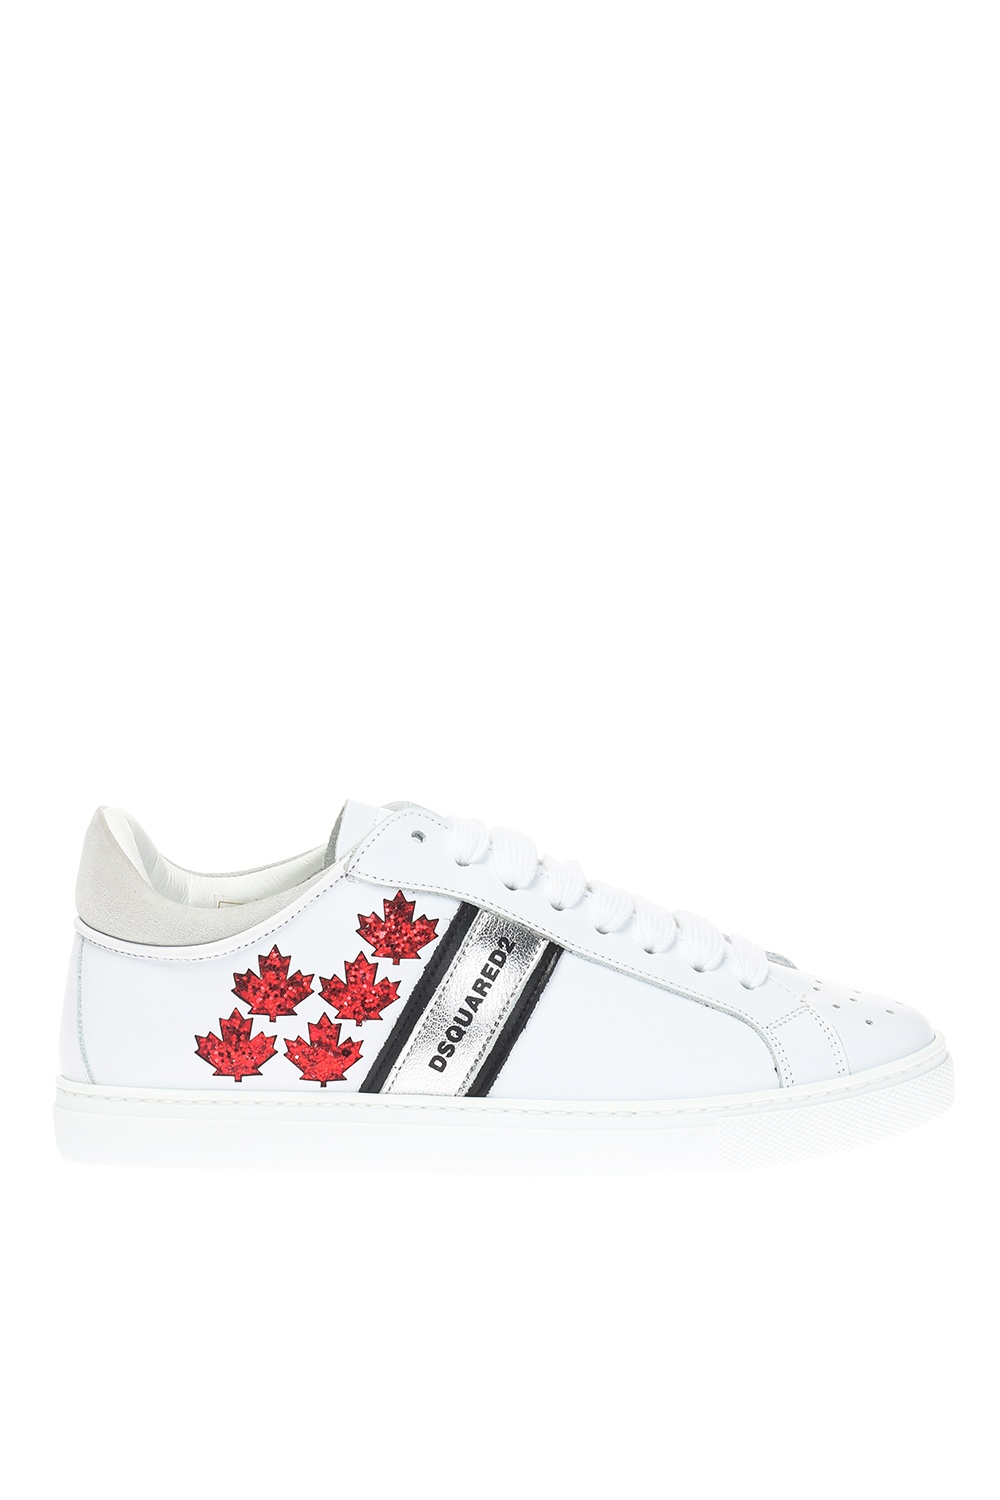 dsquared2 shoes canada